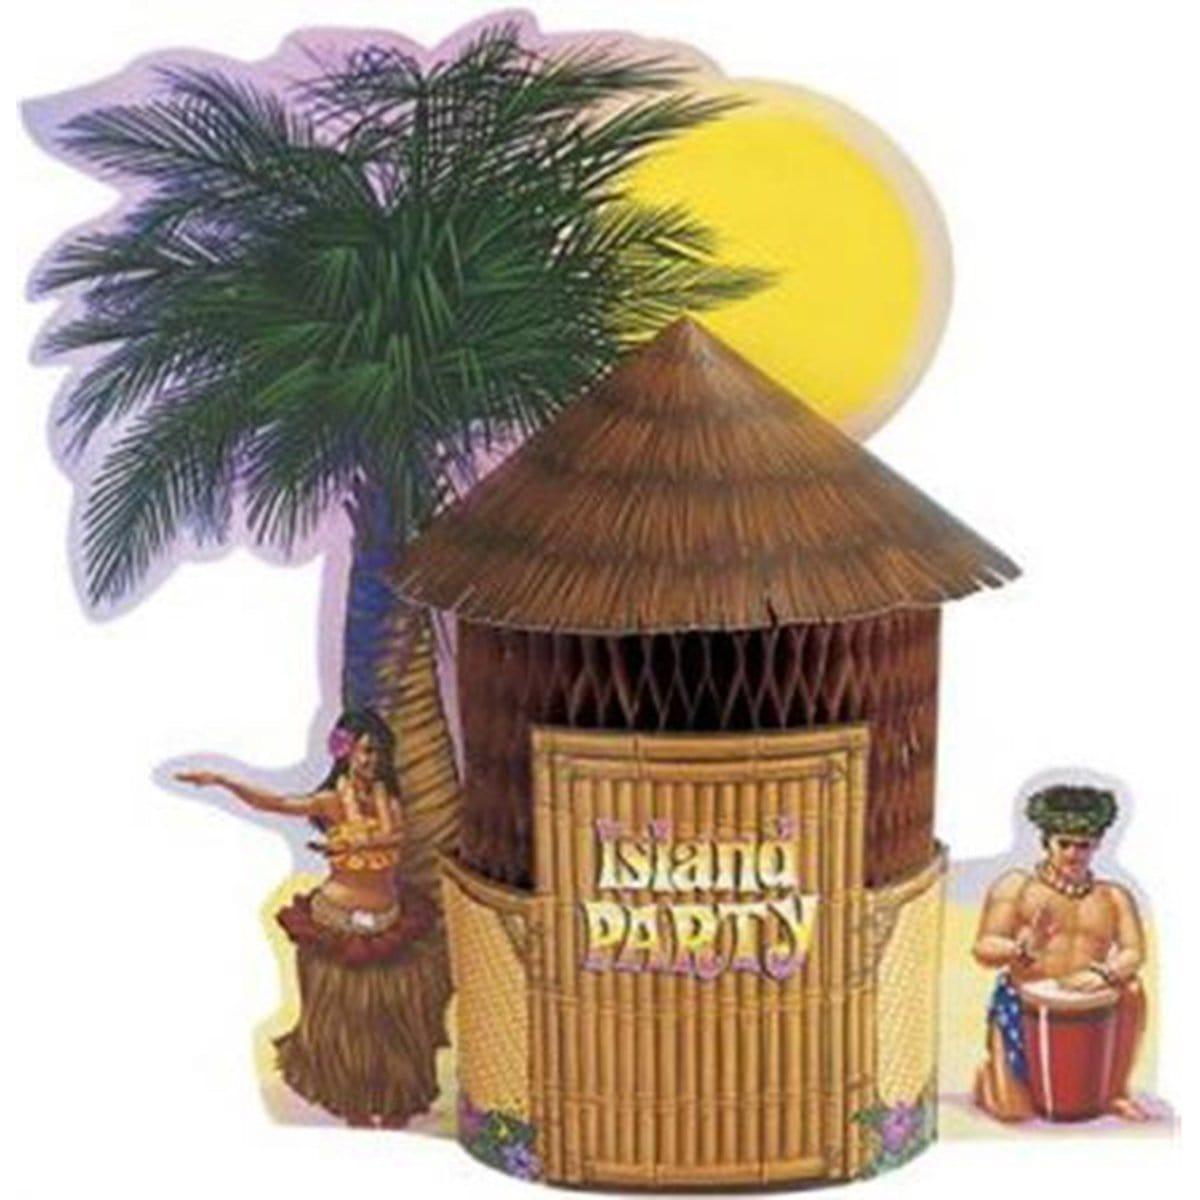 Buy Theme Party Aloha Tiki Hut Centerpiece sold at Party Expert